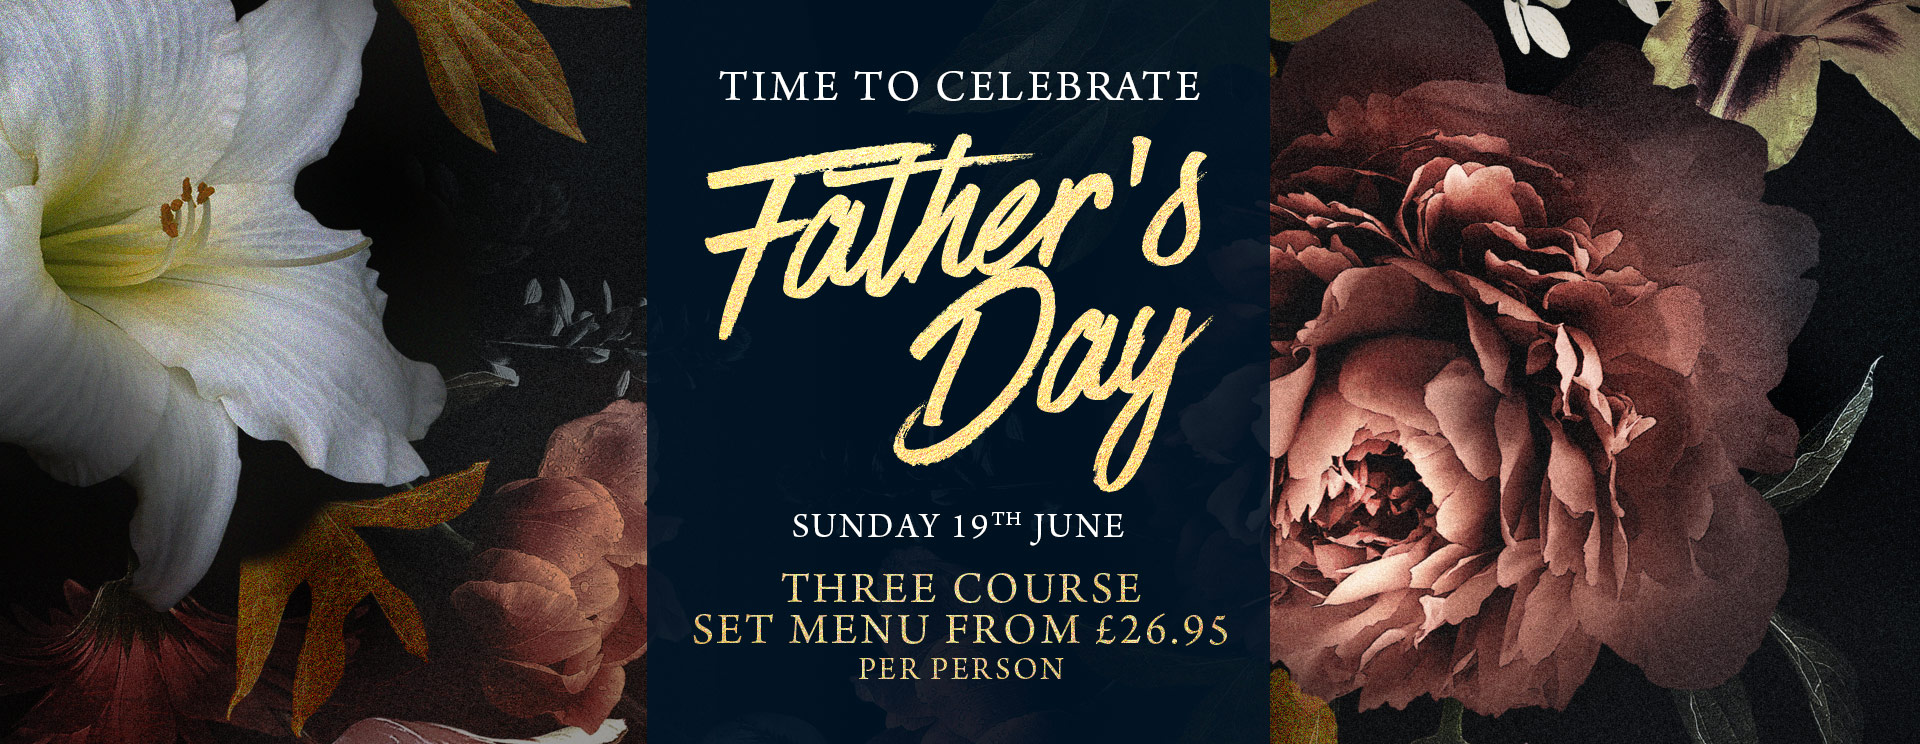 Fathers Day at The Green Man